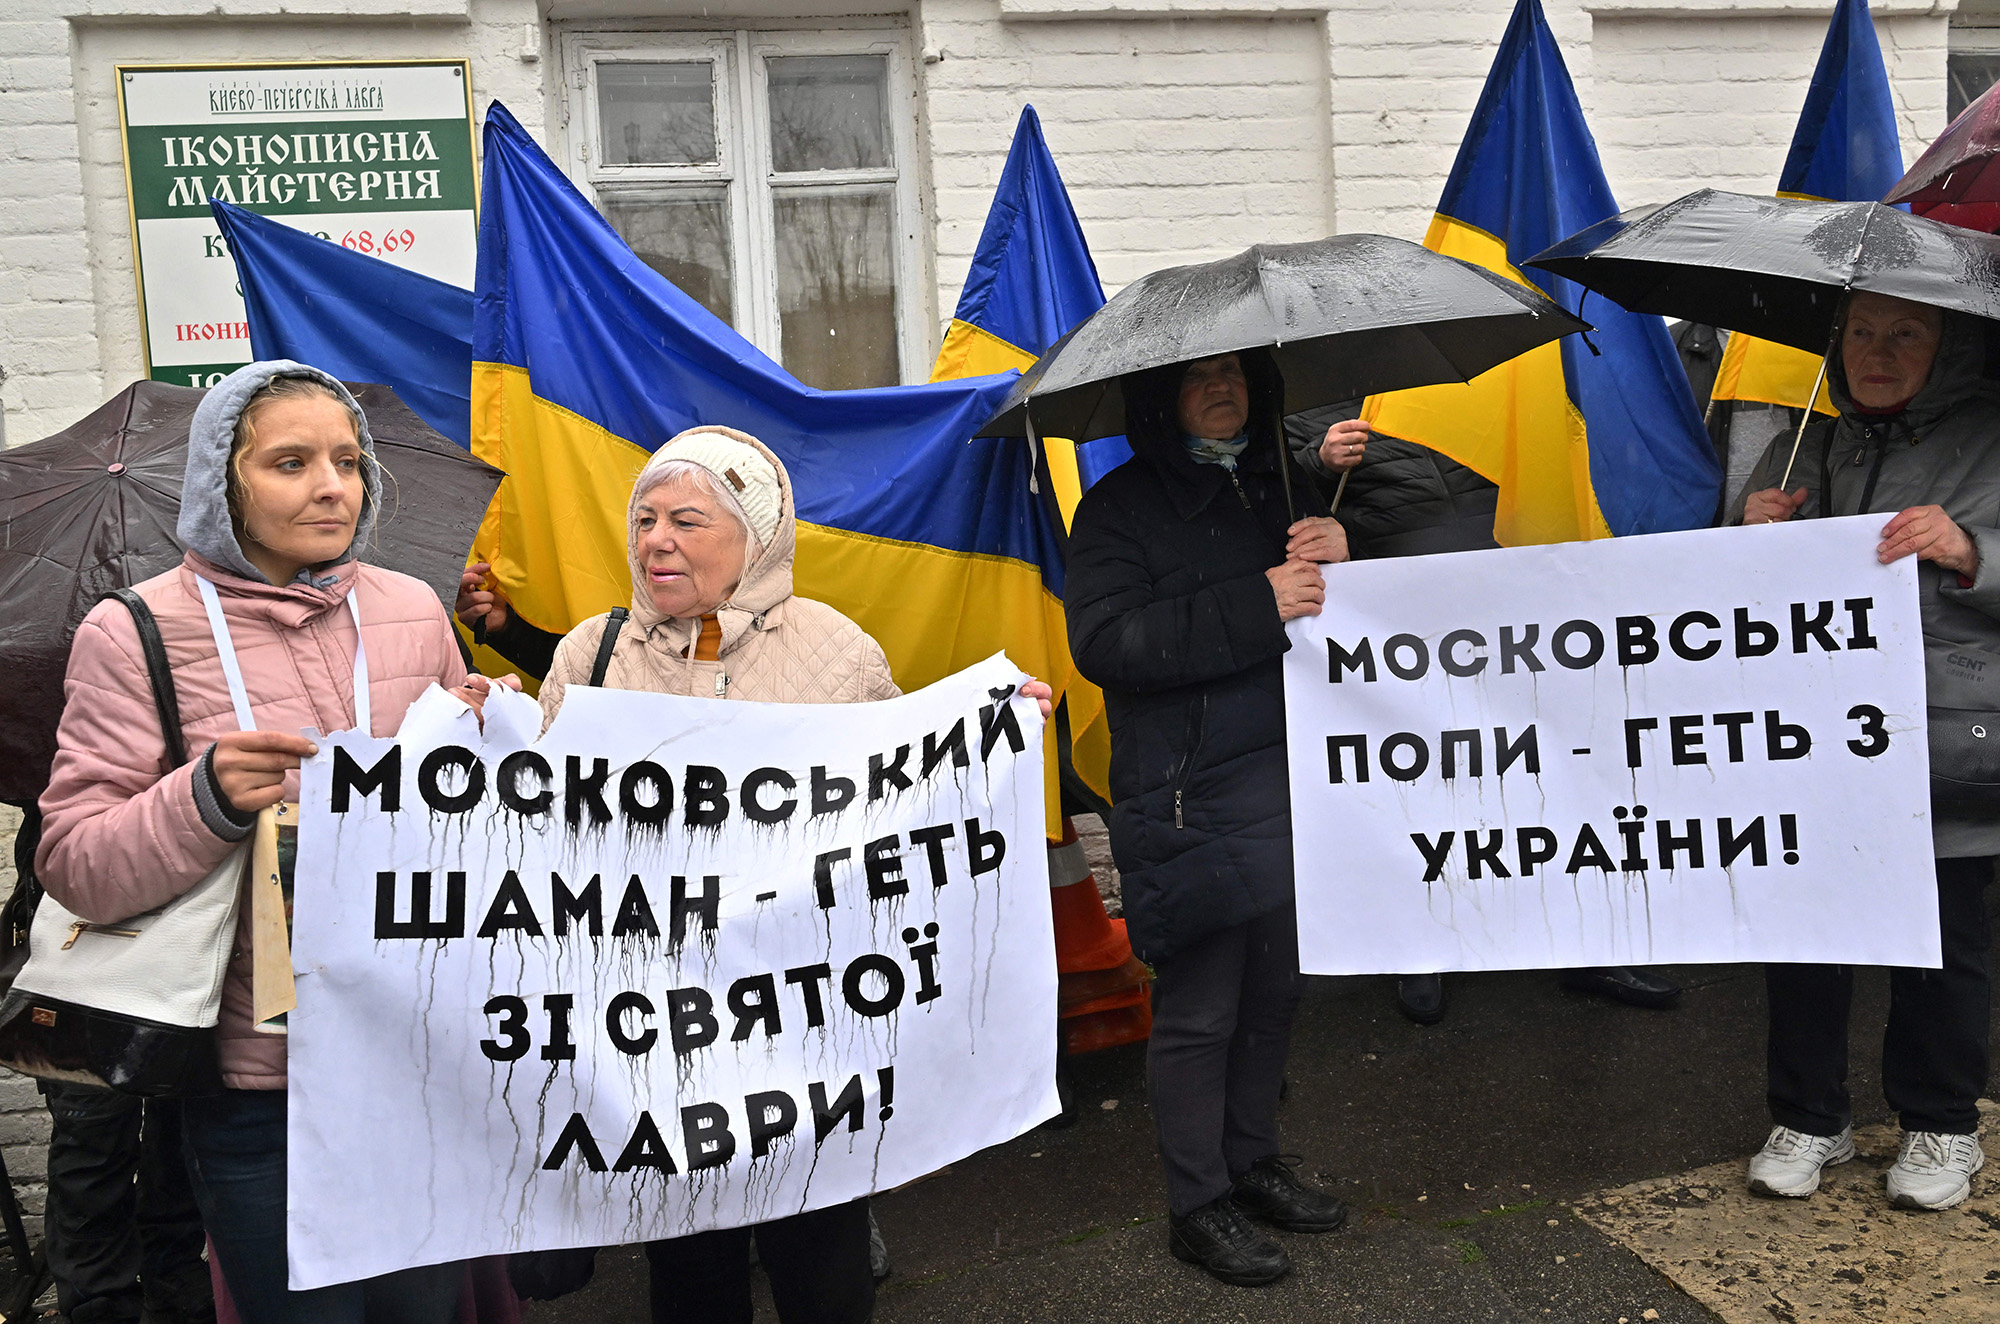 People hold placards reading "Moscow priests get away from Ukraine!", right, and "Moscow shaman get away from holy Lavra!" as they rally at the entrance to the Kyiv-Pechersk Lavra in Kyiv, Ukraine, on March 28.